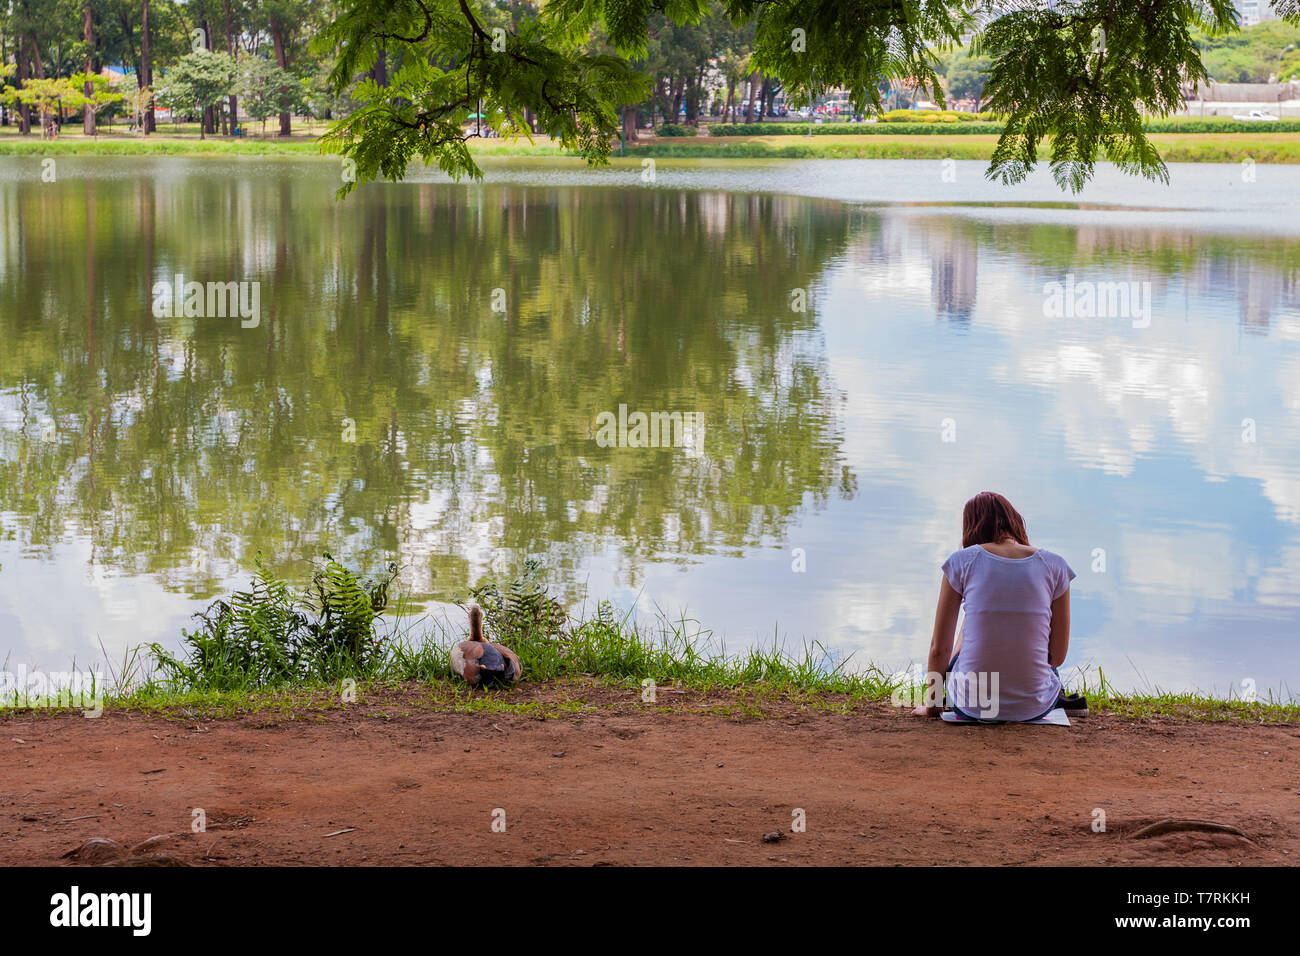 Back view of teenage girl, lonely young woman, sitting on lake shore, with duck on the banks, Lago (Lake) das Garças, Parque (Park) Ibirapuera, Brazil Stock Photo